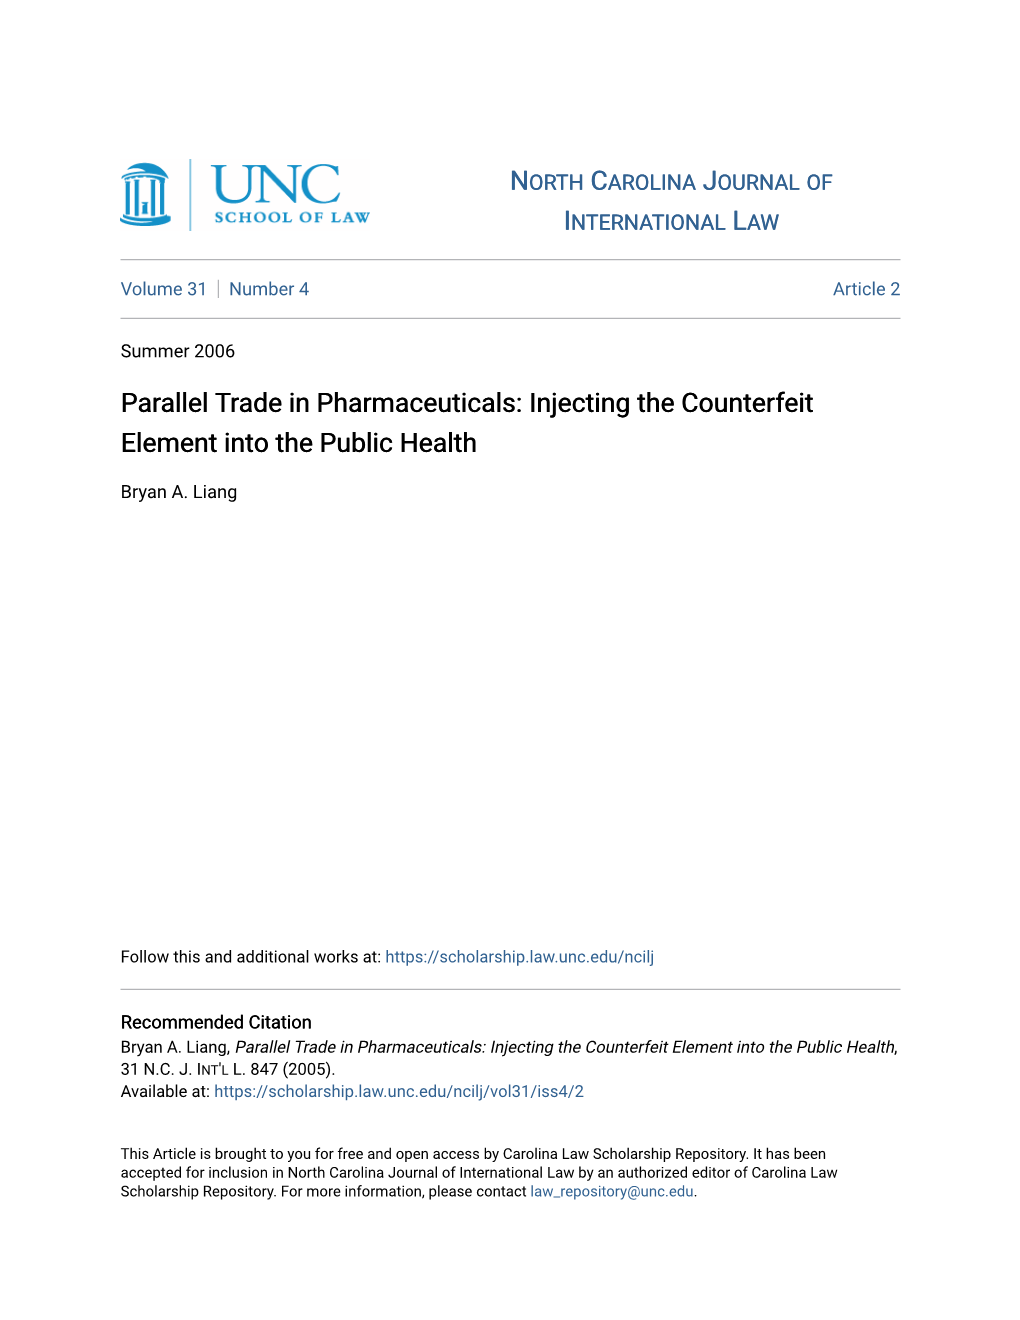 Parallel Trade in Pharmaceuticals: Injecting the Counterfeit Element Into the Public Health